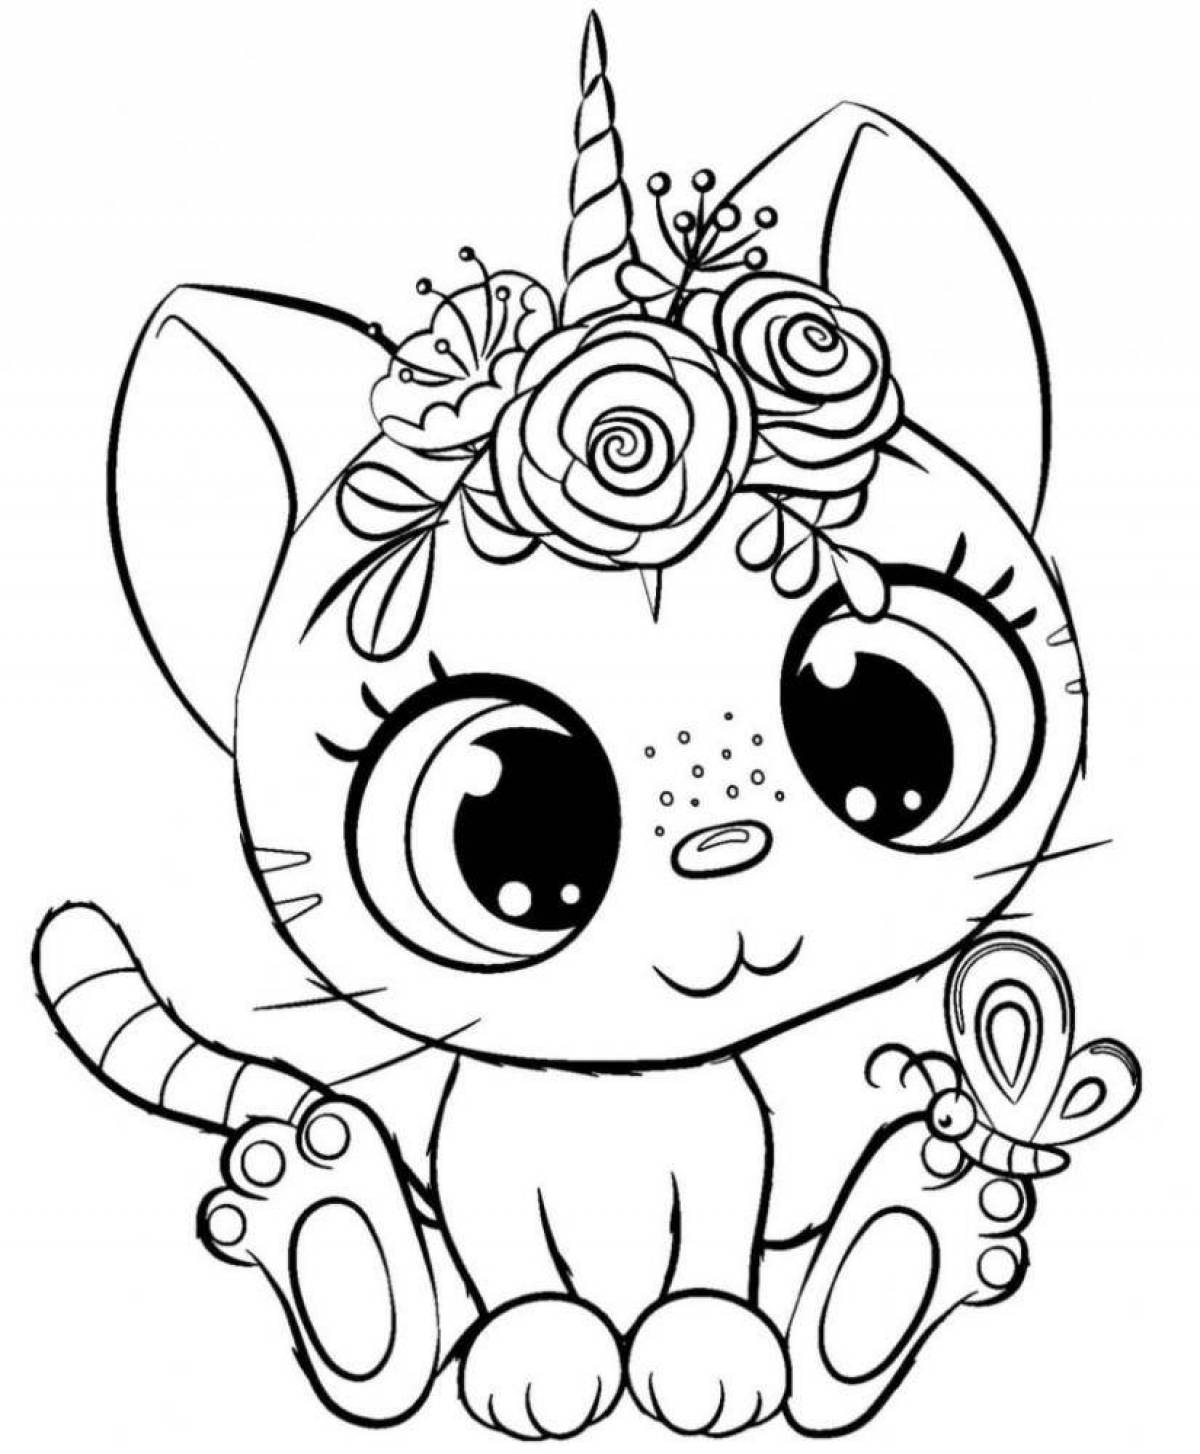 Lily kitty playful coloring page